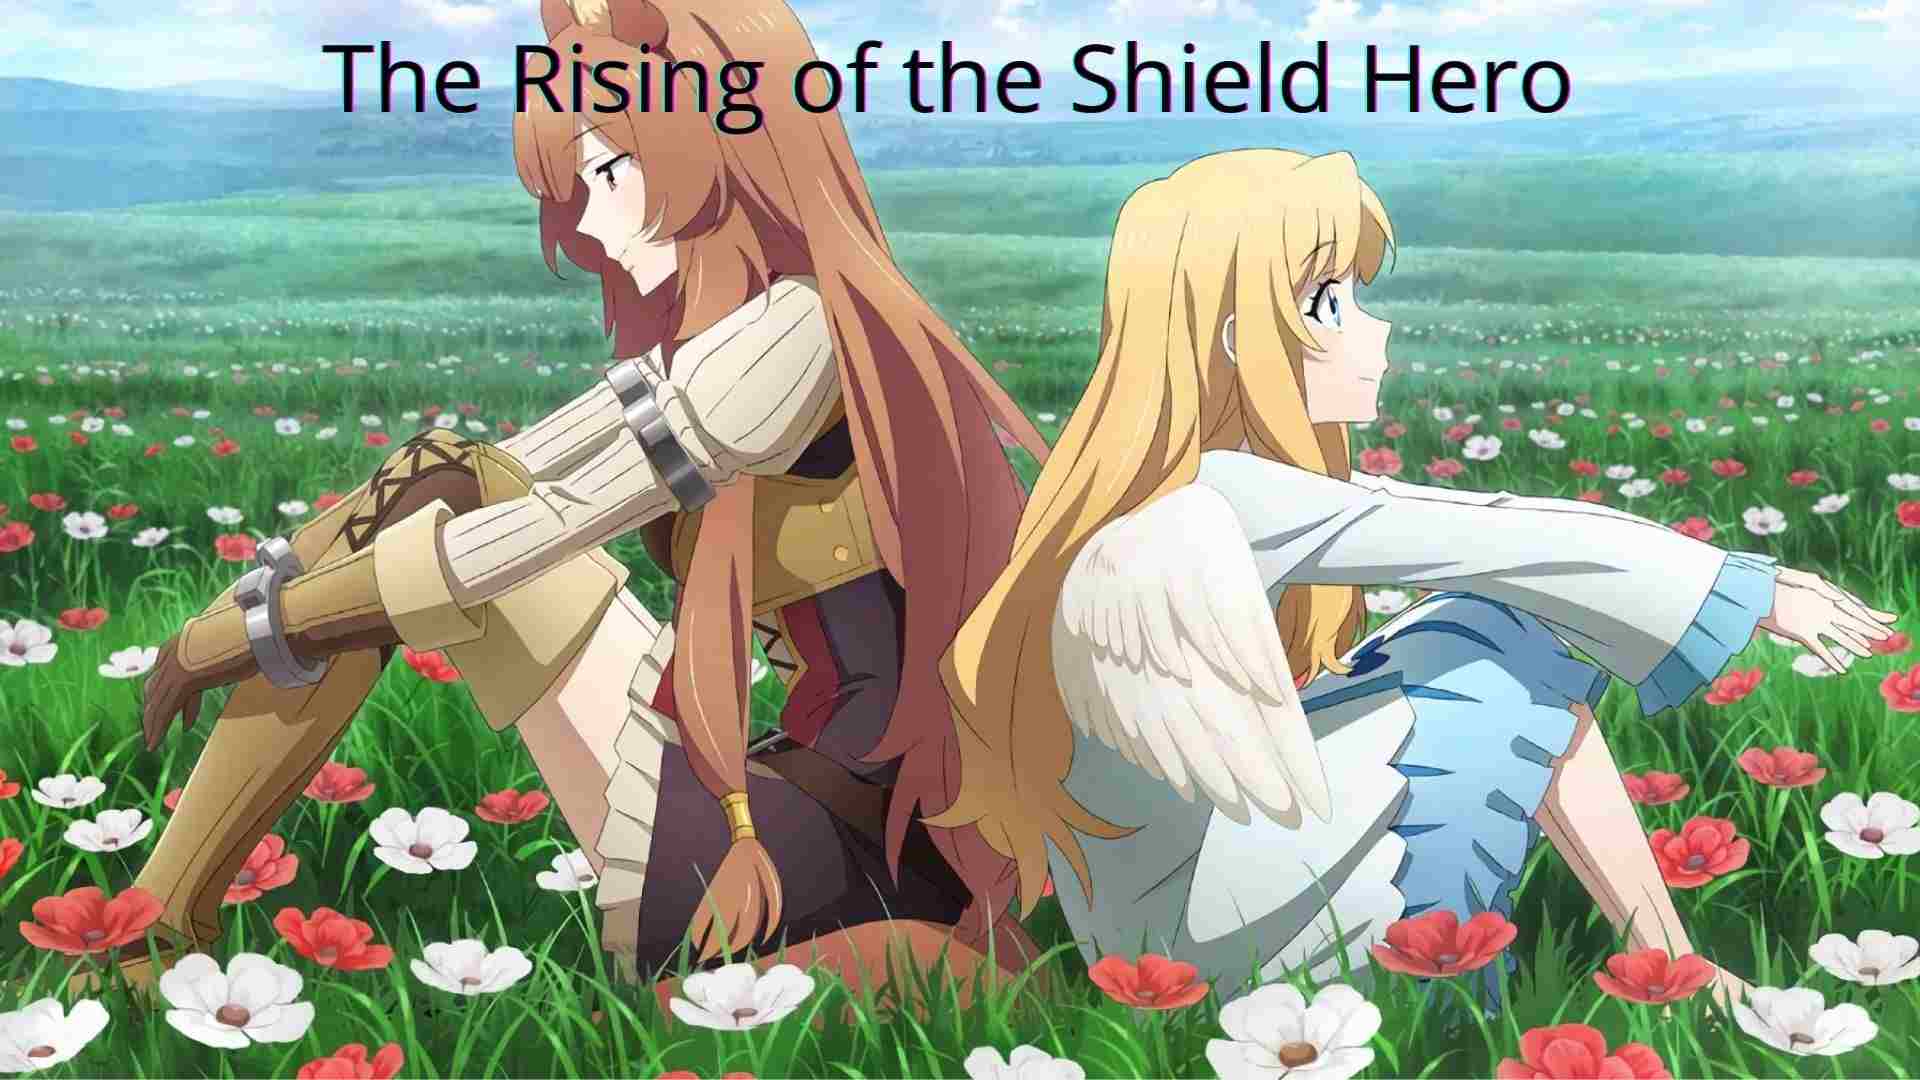 The Rising of the Shield Hero Producer, Writer, and Director